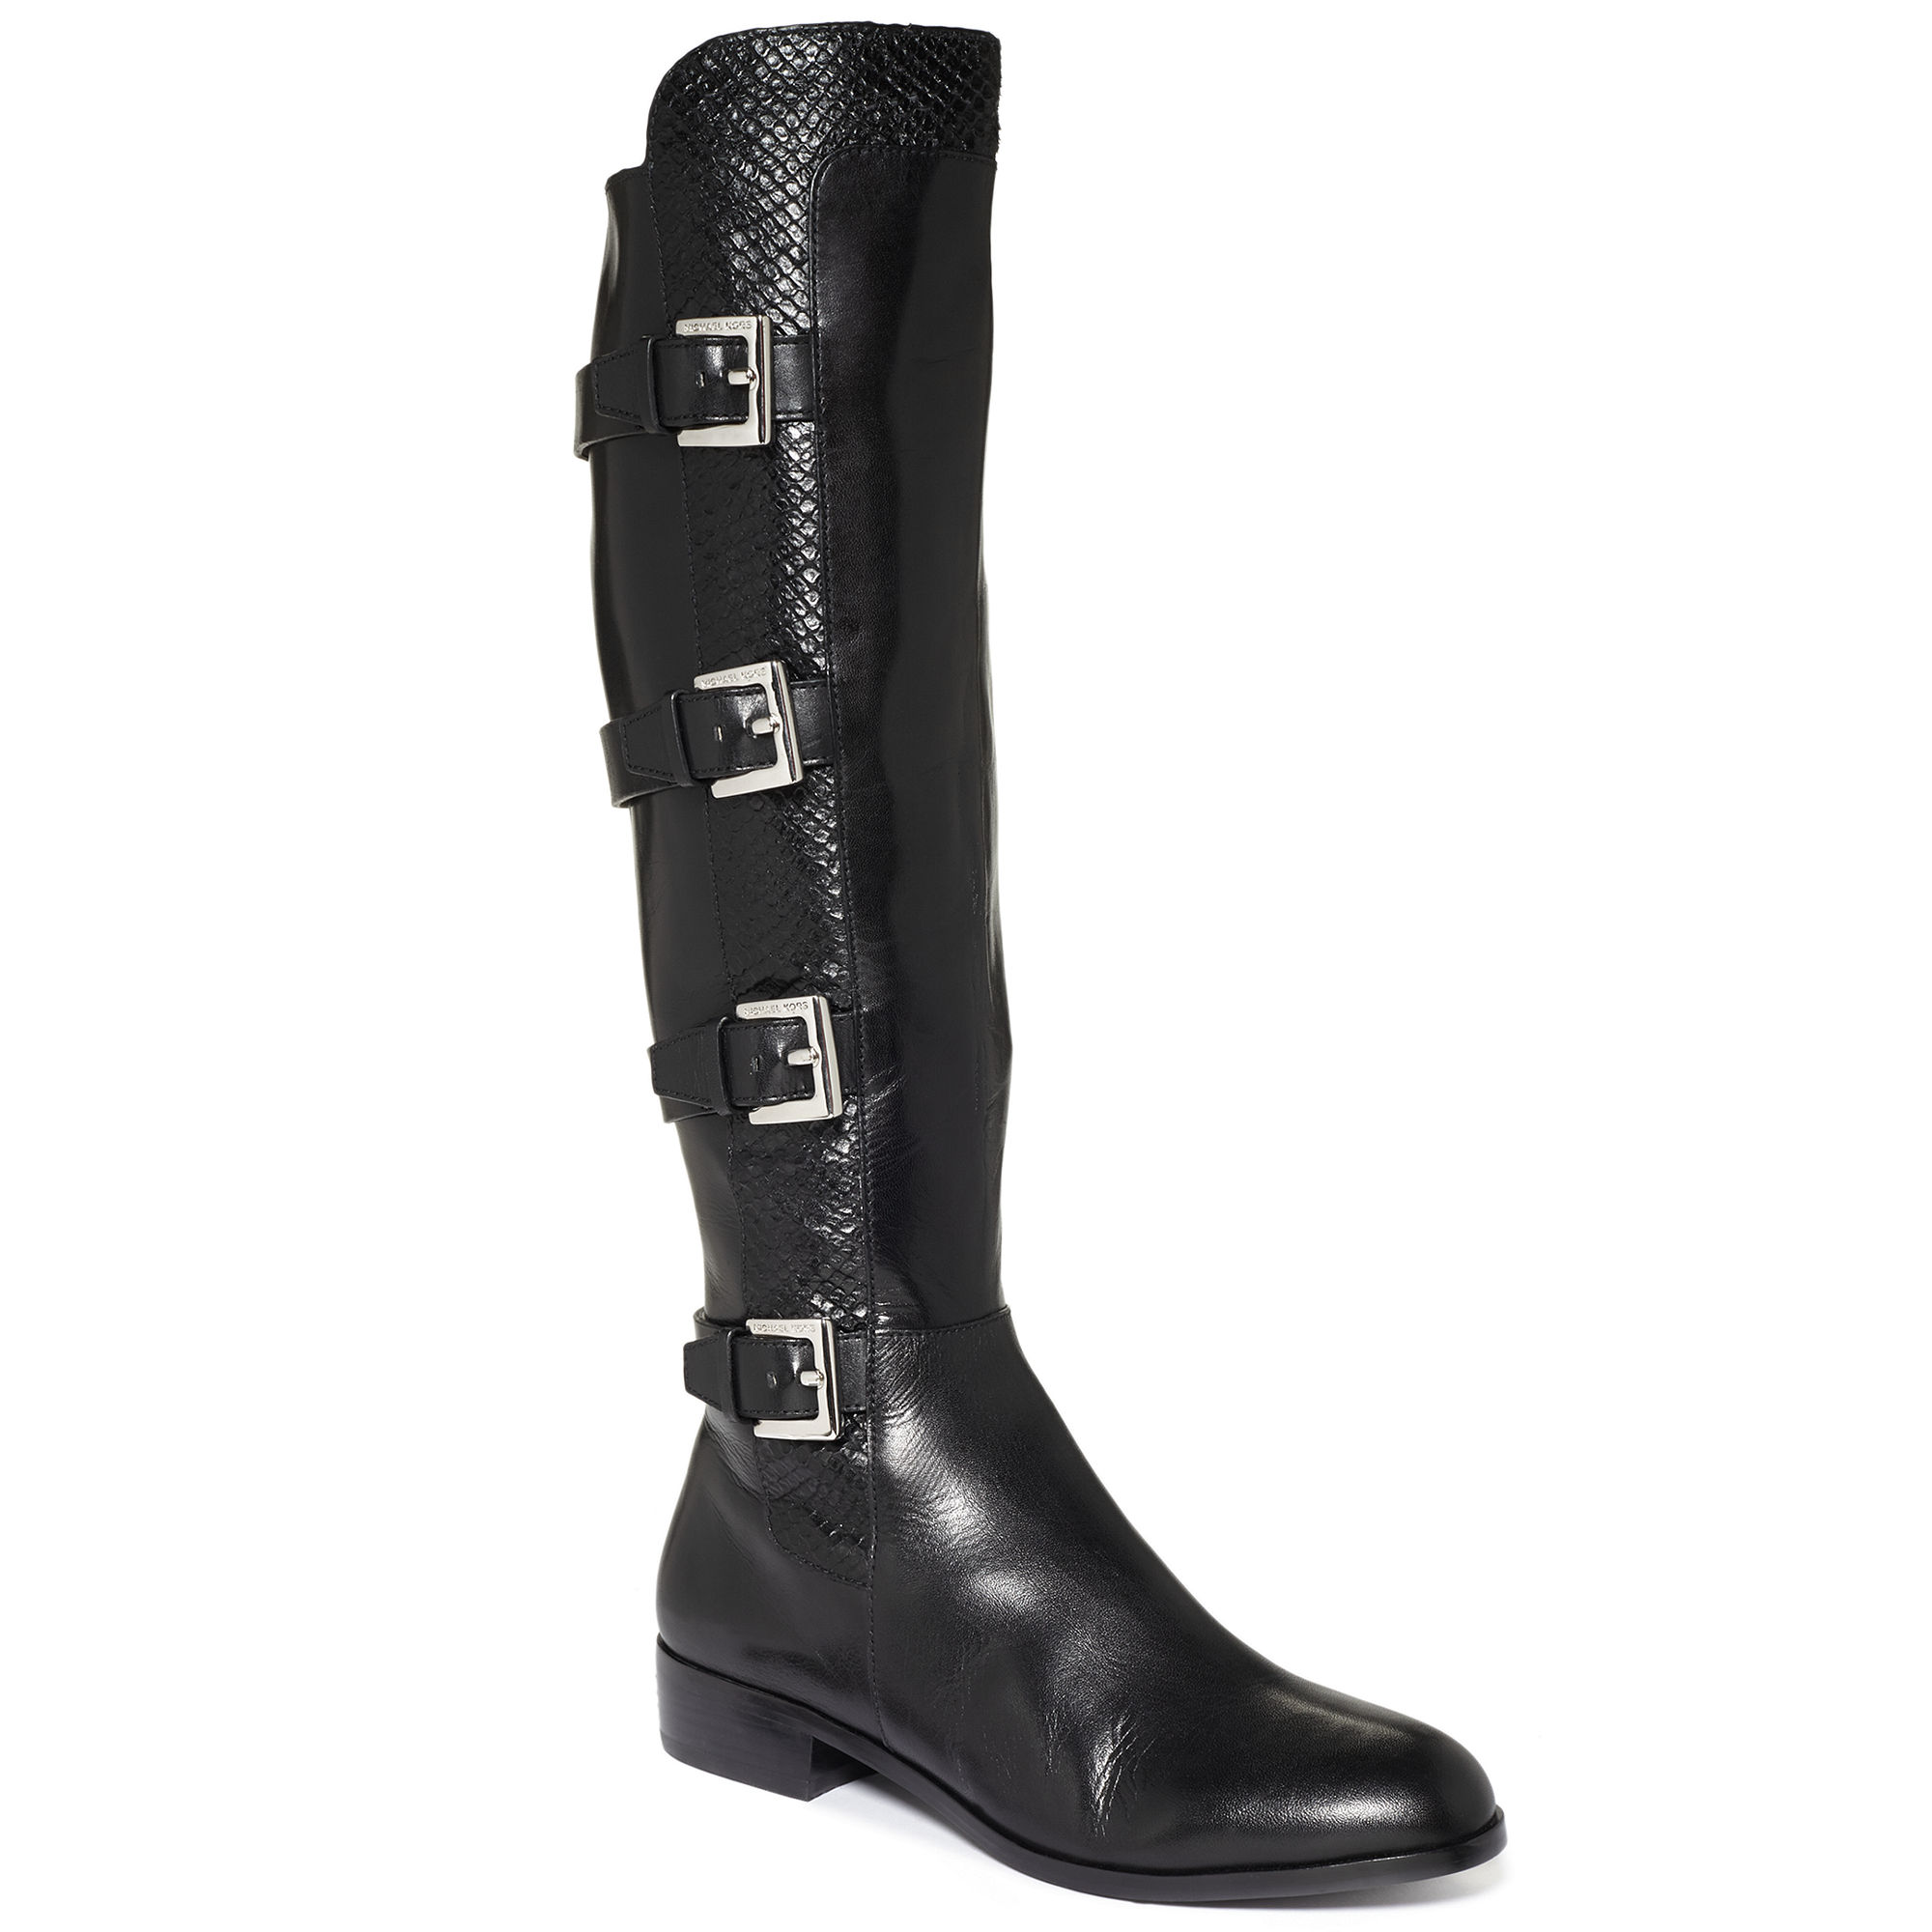 Michael Kors Tamara Tall Riding Boots in (Black Leather/Printed Snake ...